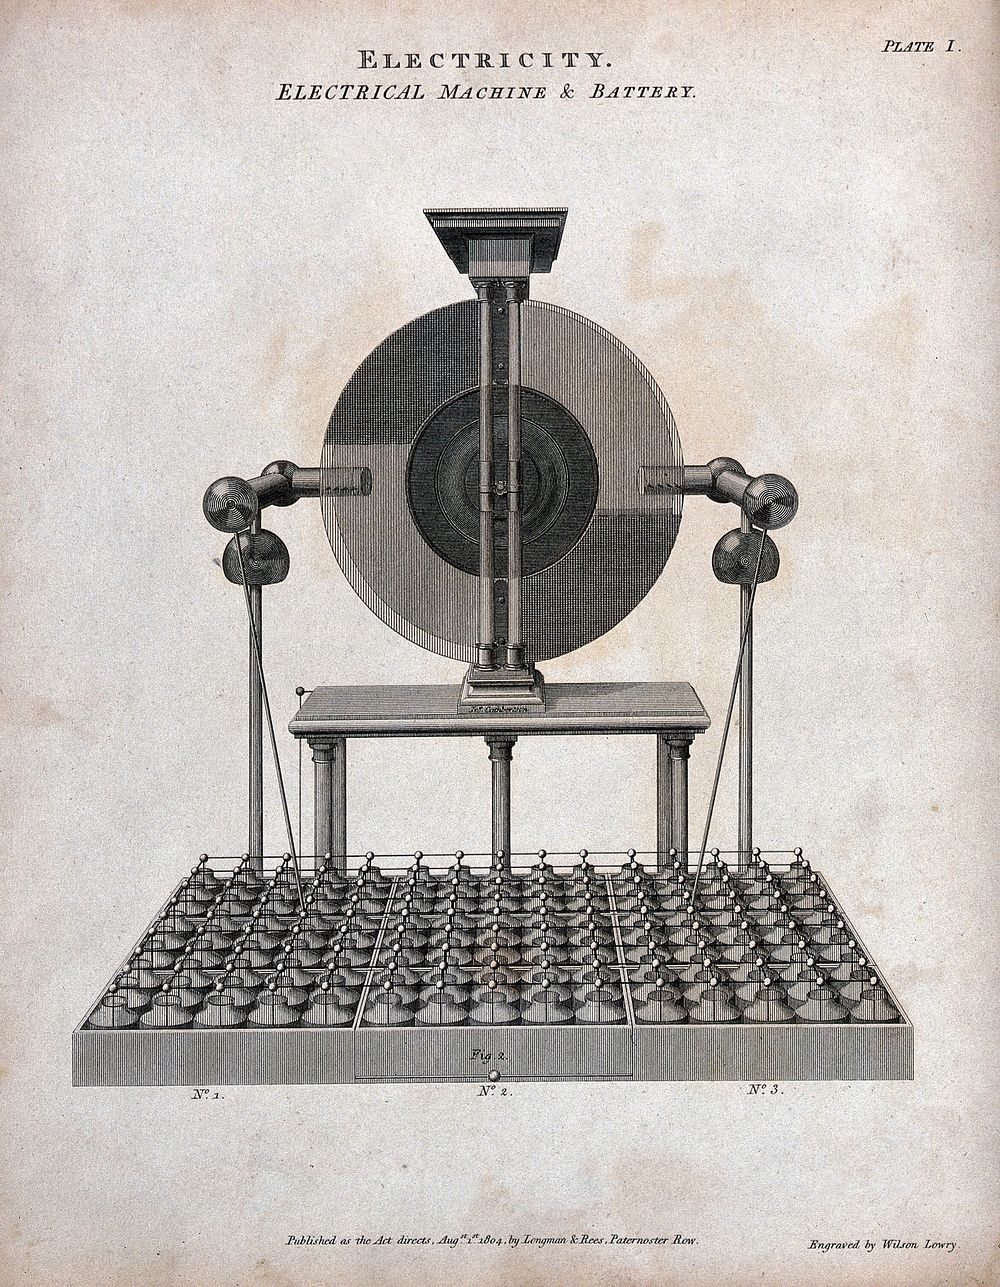 Electricity: J. Cuthbertson's electro-static generator, batteries, etc. Engraving, 1804, by W. Lowry.